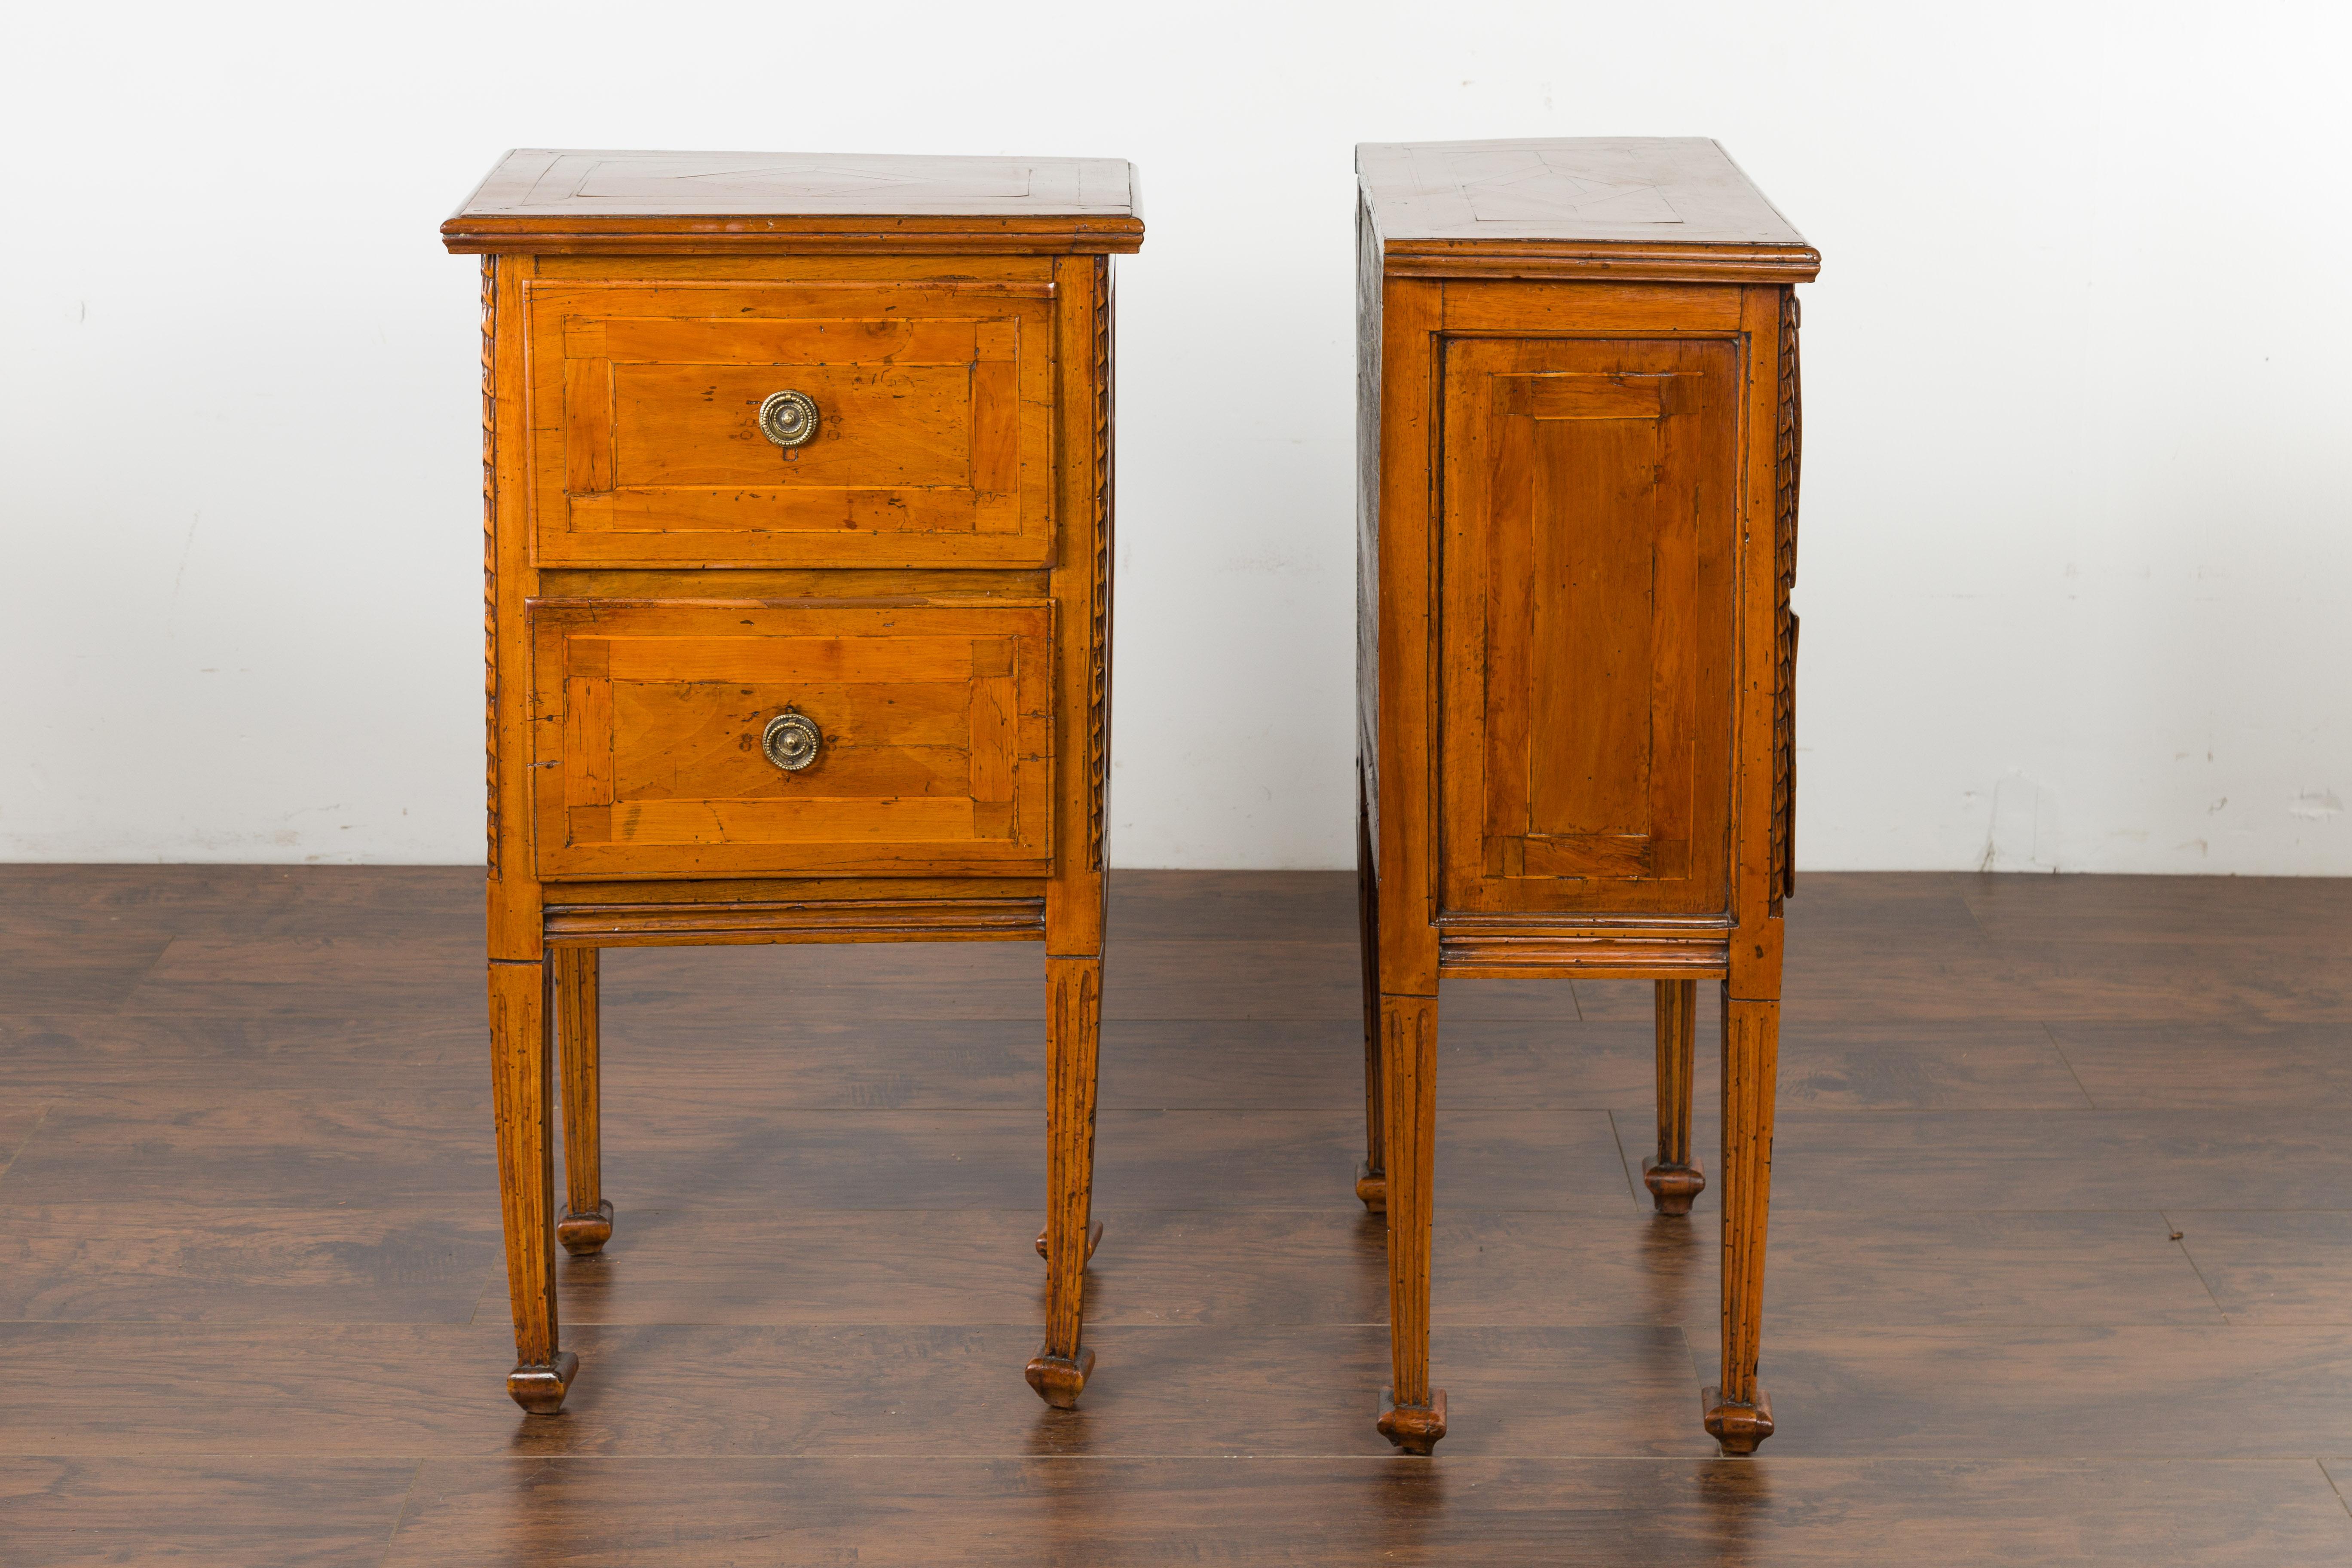 Pair of Italian 1820s Neoclassical Period Walnut Bedside Tables with Two Drawers For Sale 3